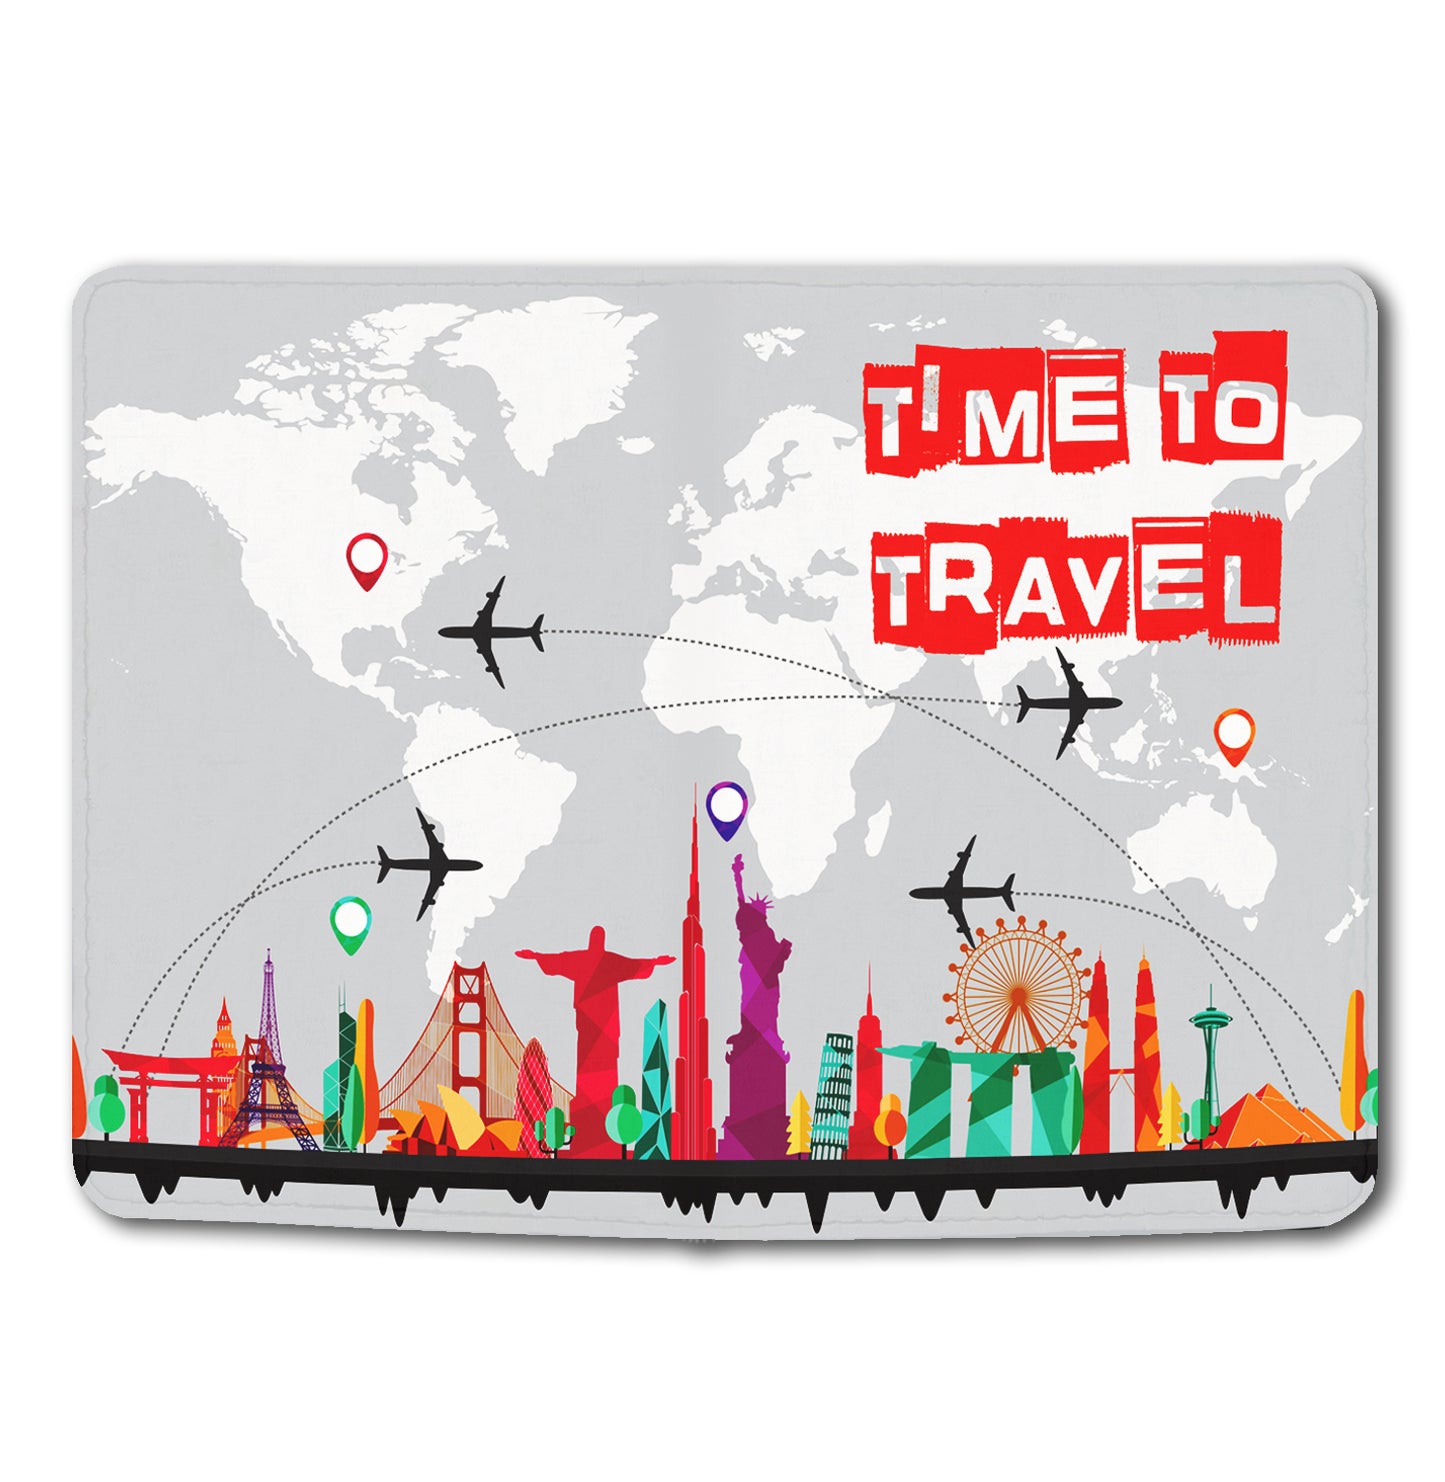 Vegan Leather Time to Travel canvas Passport Cover/Holder